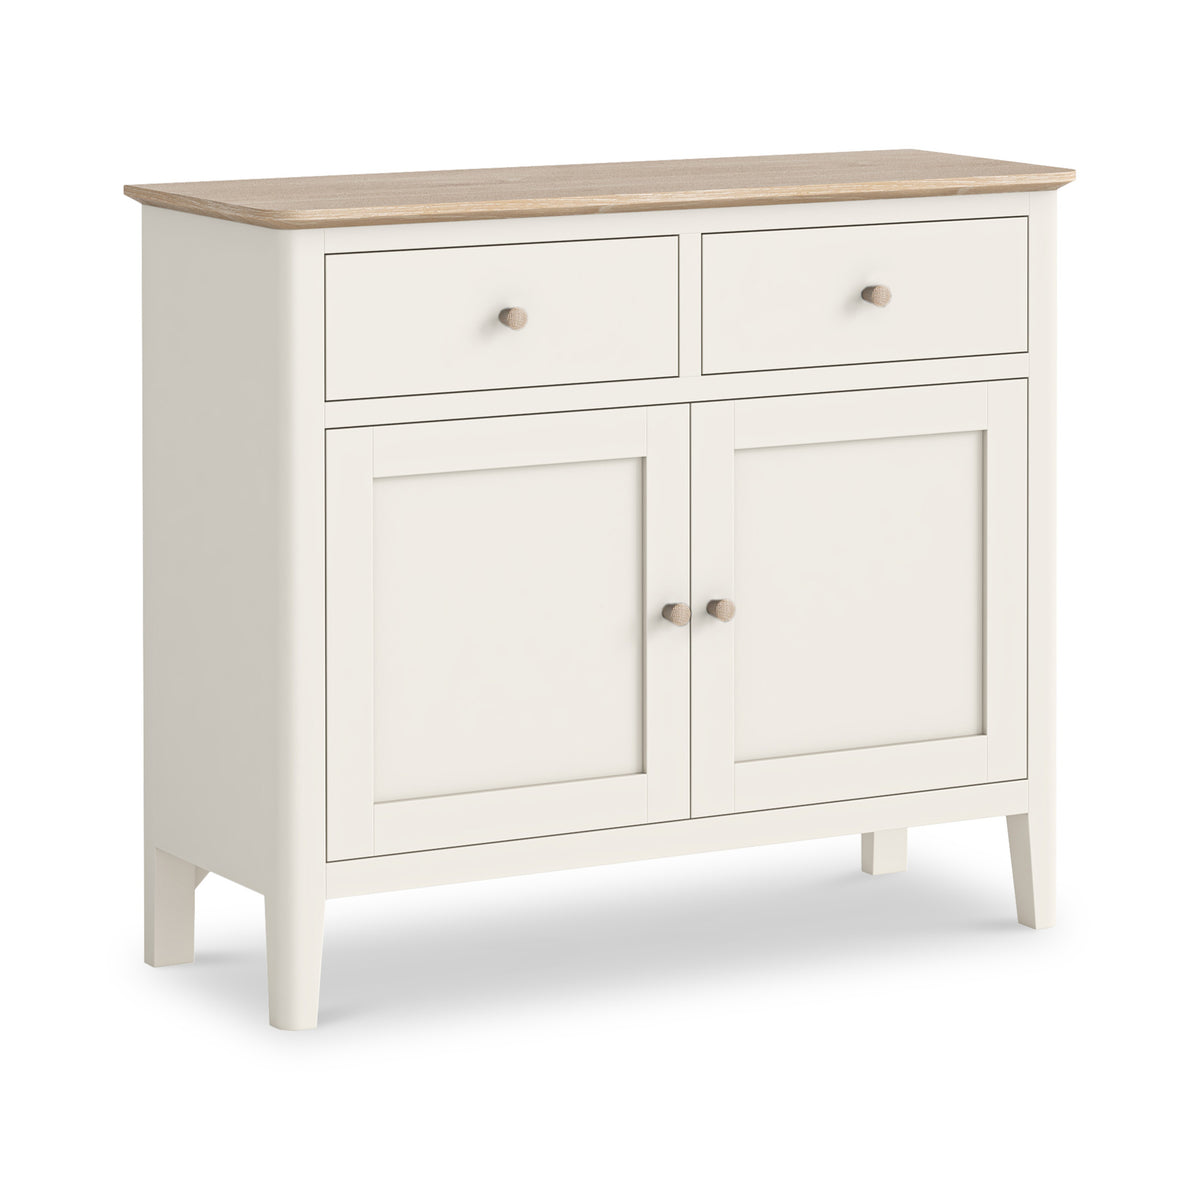 Penrose Coconut White Small Sideboard Cabinet with wooden handles from Roseland Furniture